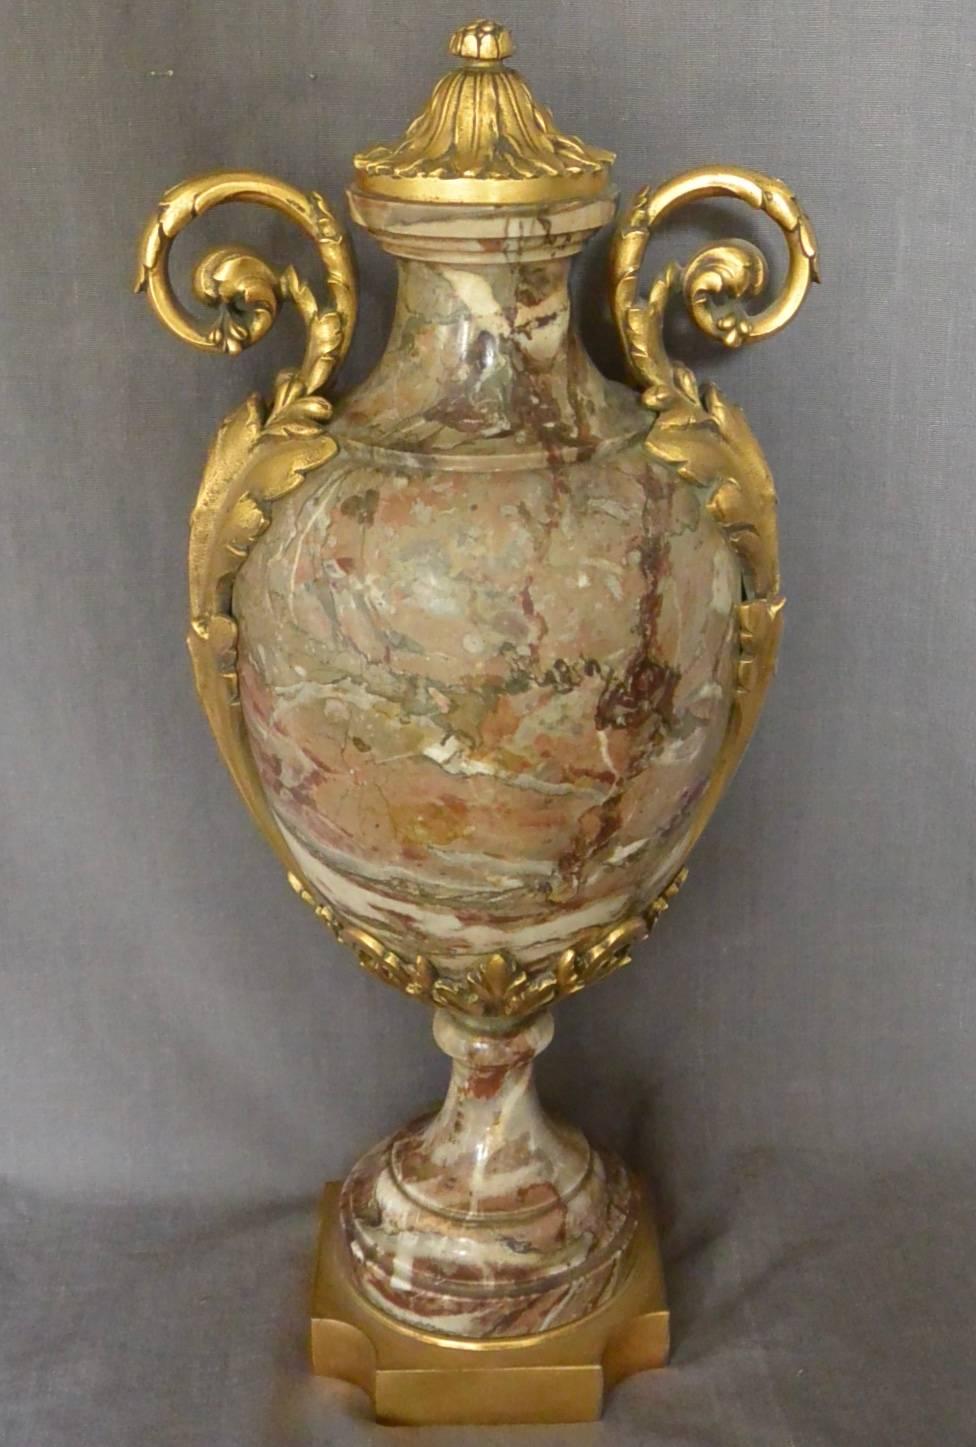 Continental ormolu-mounted marble urn. Onyx stone urn in browns, beige and grey cream with foliate ormolu outward scrolling handles and richly chased lid all on incurving square base. Europe, circa 1870
Dimensions: 8.5